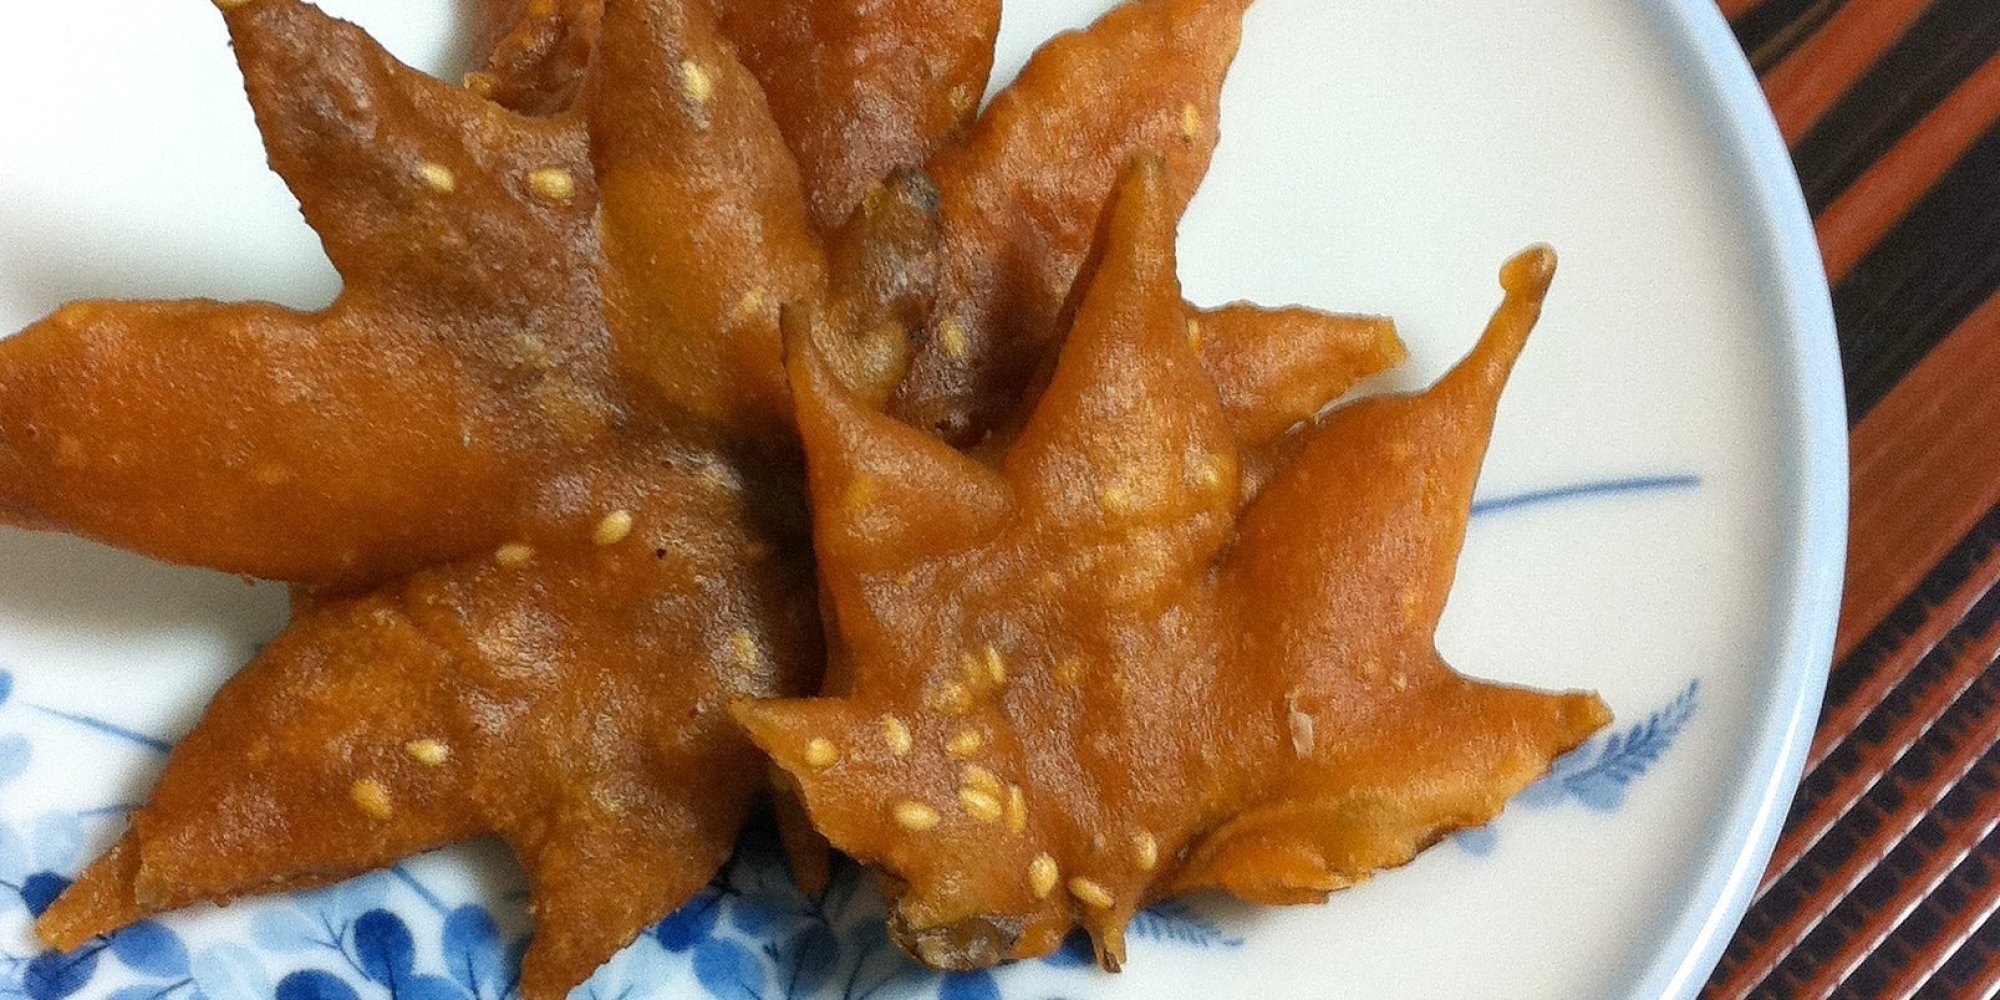 Video: Snacking on deep-fried maple leaves